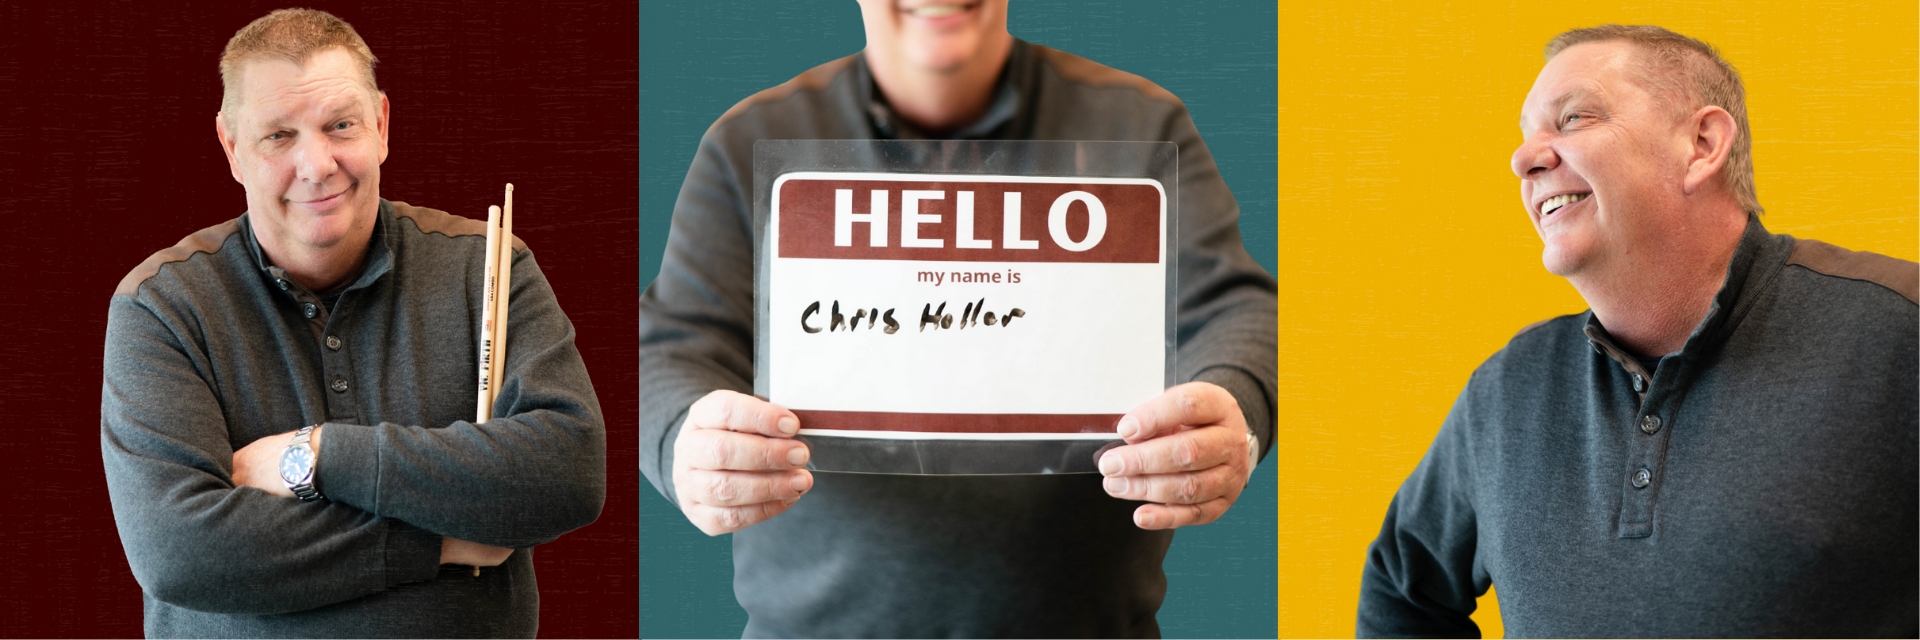 Collage of three photos of Chris Hollar holding drum sticks, a sign that says, "Hello my name is Chris Hollar", and a photo of Chris looking to the left.